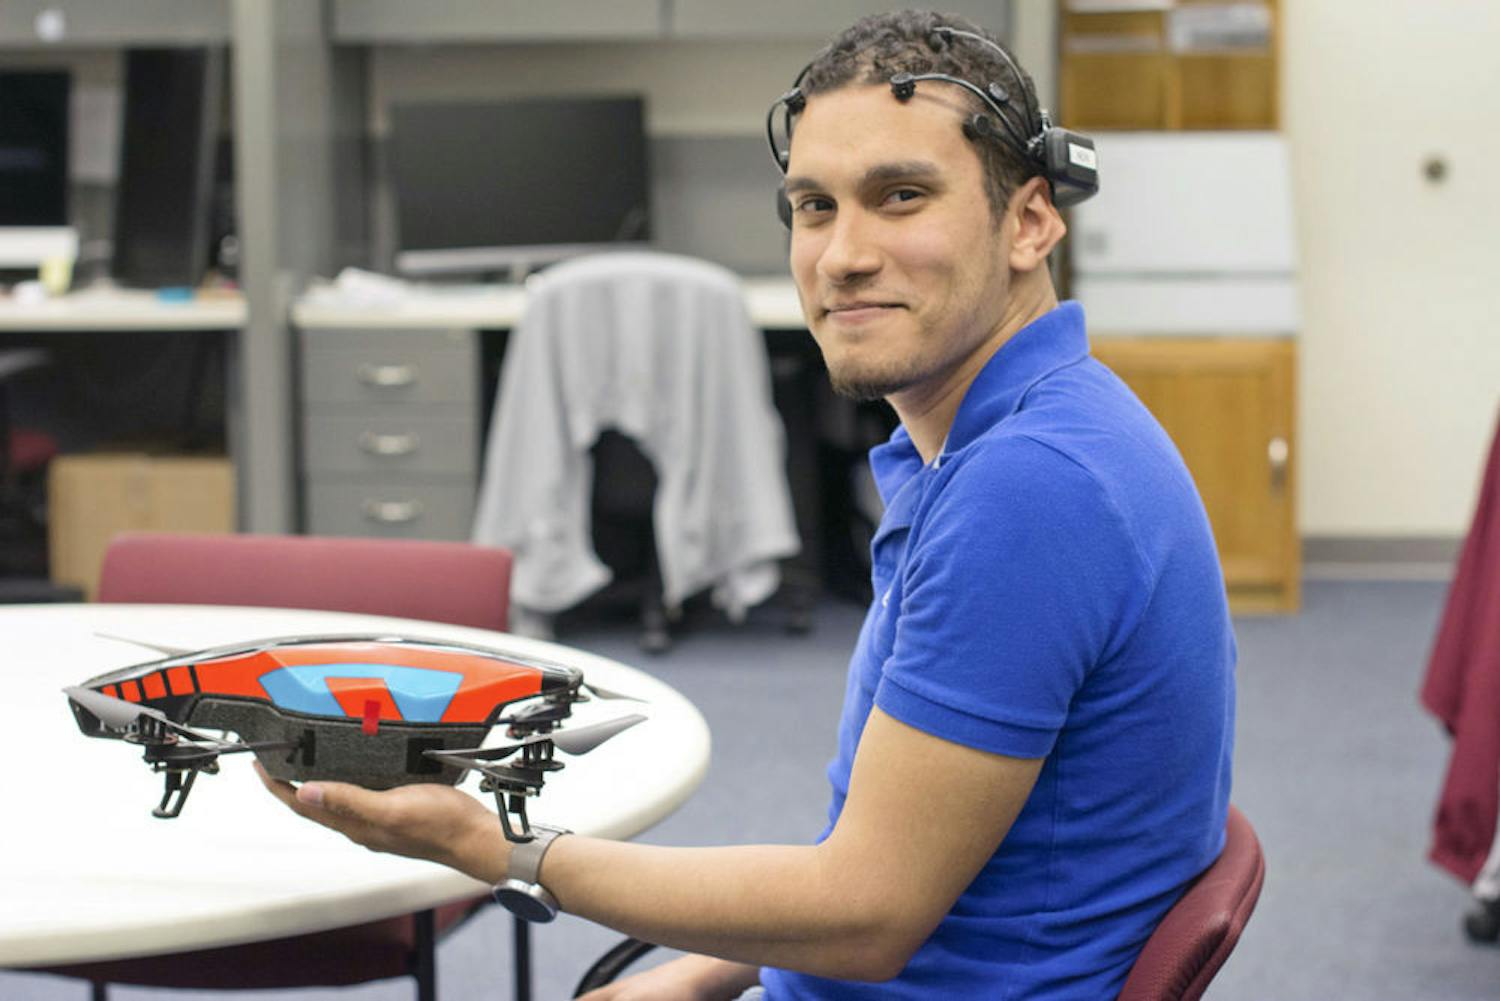 Marvin Andujar, a 25-year-old UF human-centered computing doctoral student, poses for a photo with a mind-controlled drone that he and his partner, Chris Crawford, programmed.